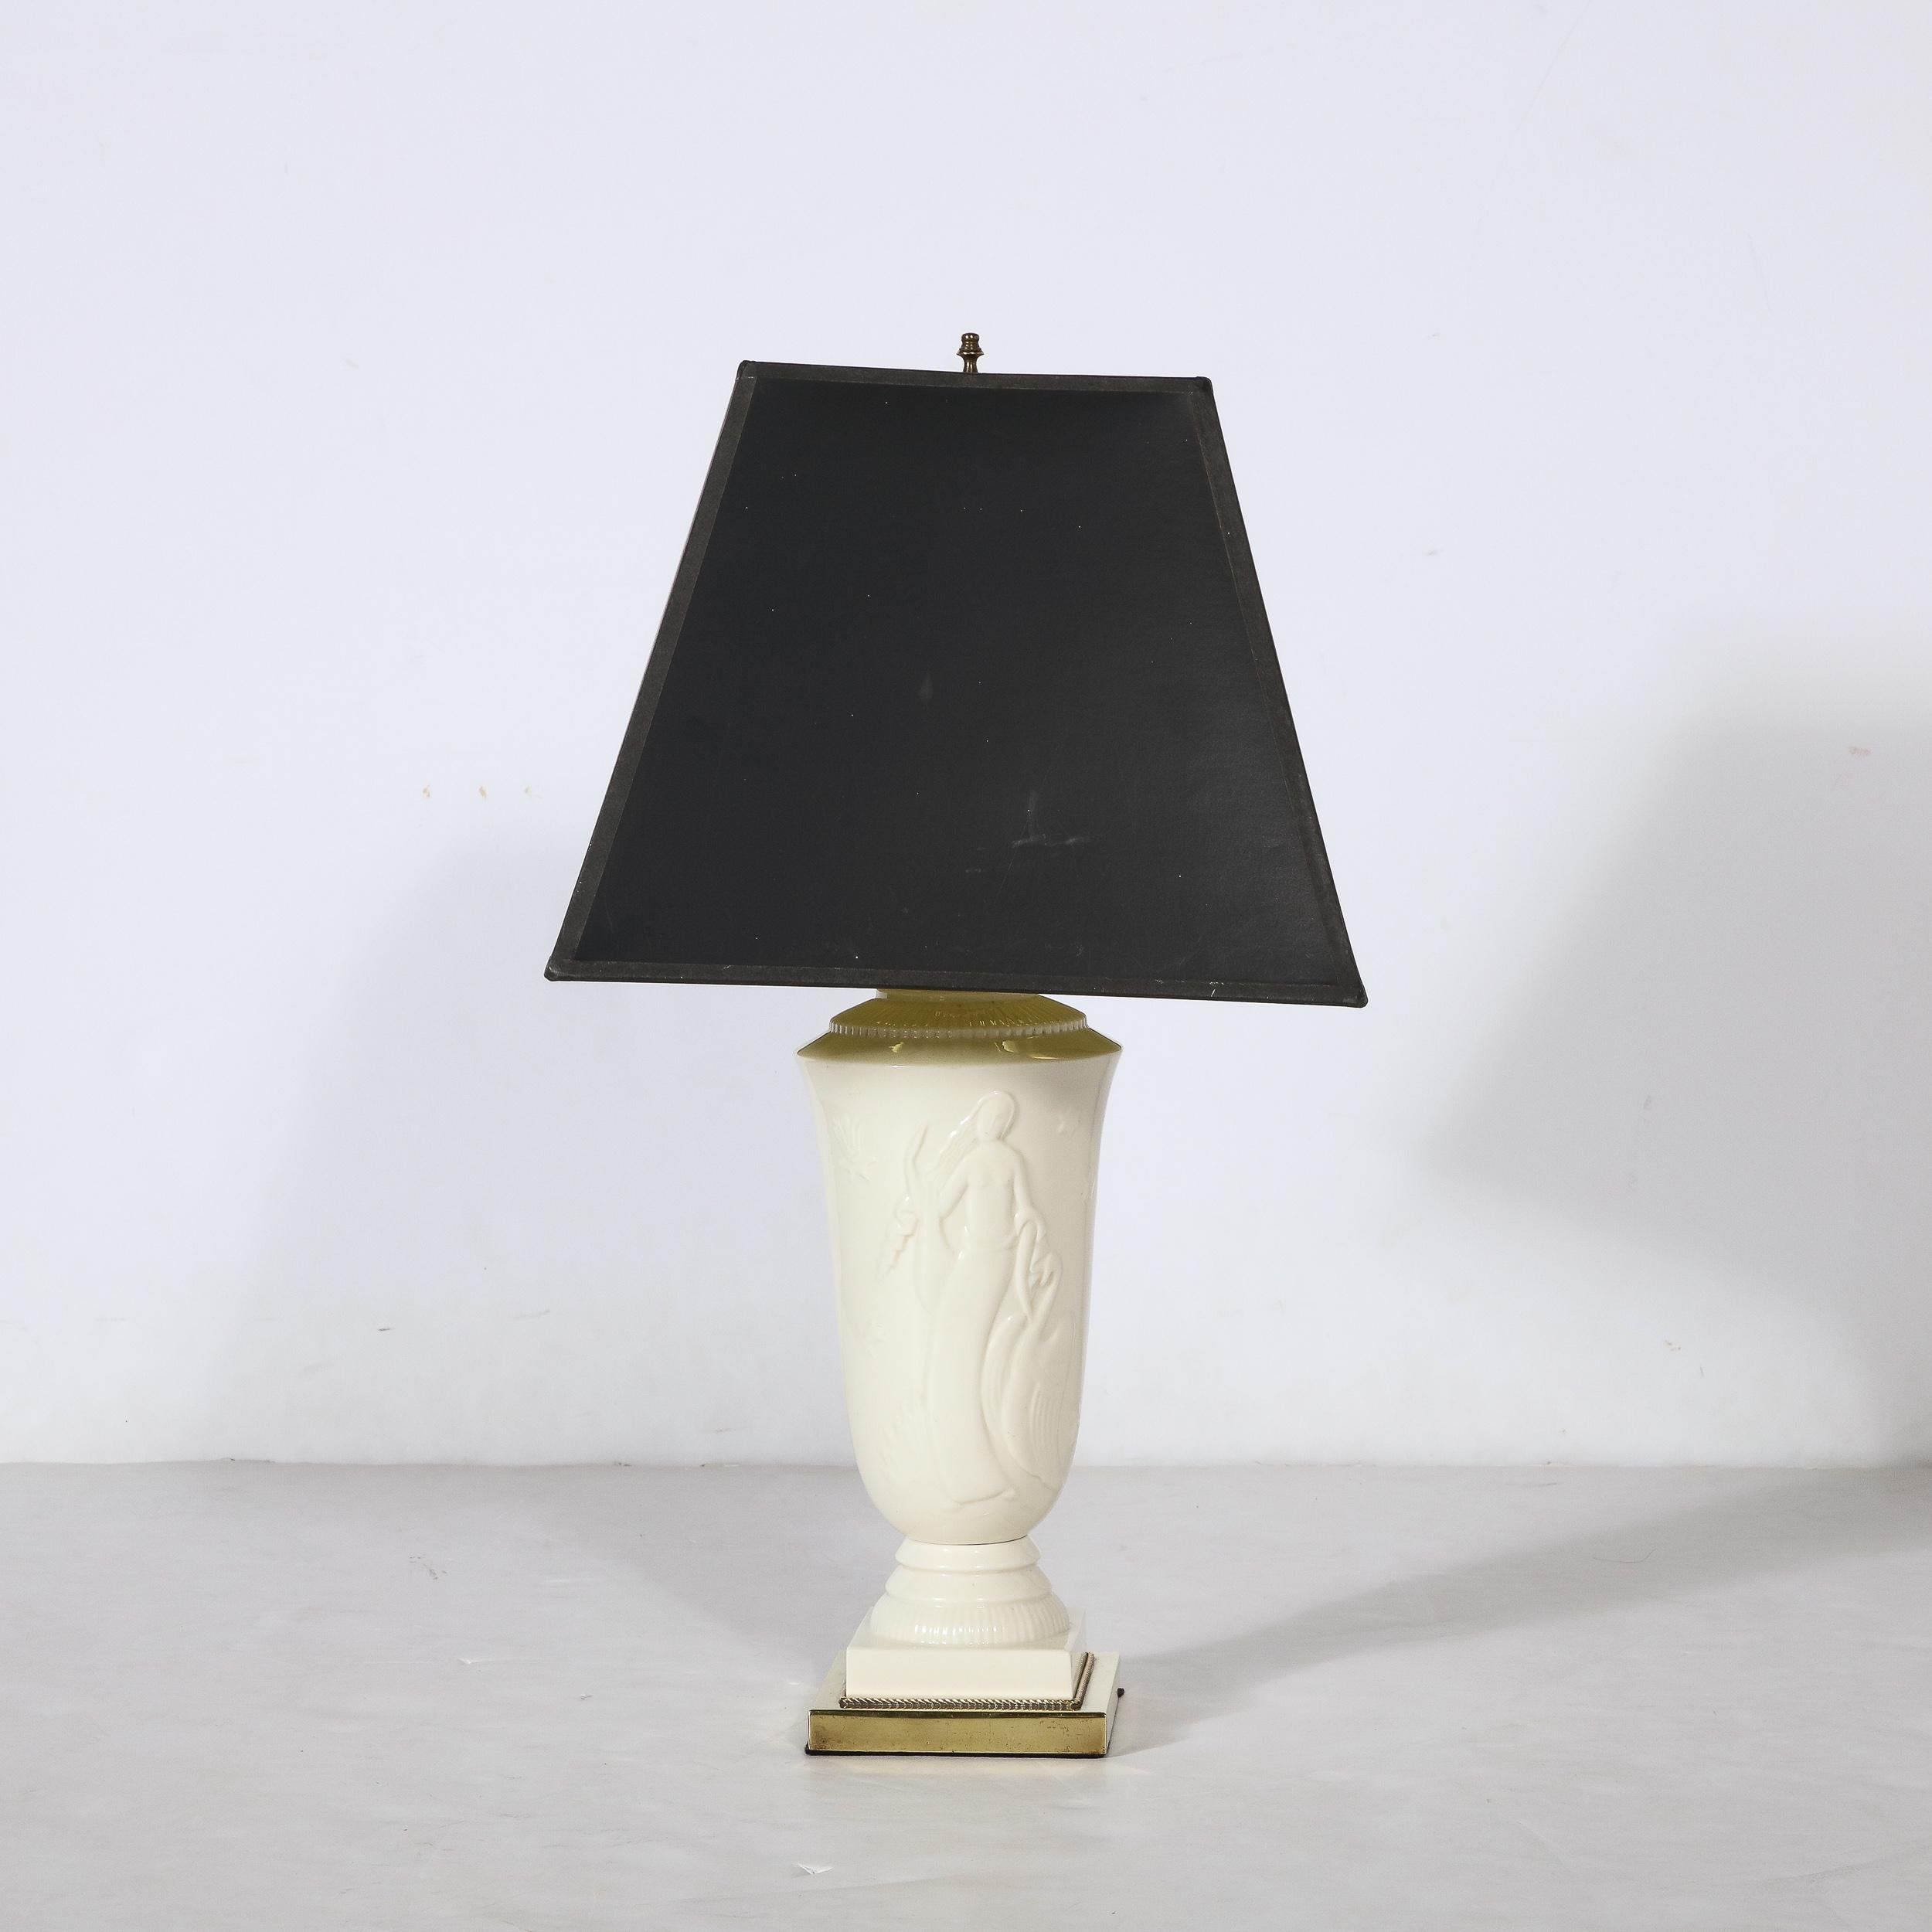 This lovely Art Deco Porcelain Table Lamp of Leda and the Swan by De Vegh for Lenox originates from the United States, Circa 1930. Features a rectangular polished brass base from which the urn form body of the lamp rises. The porcelain is of the